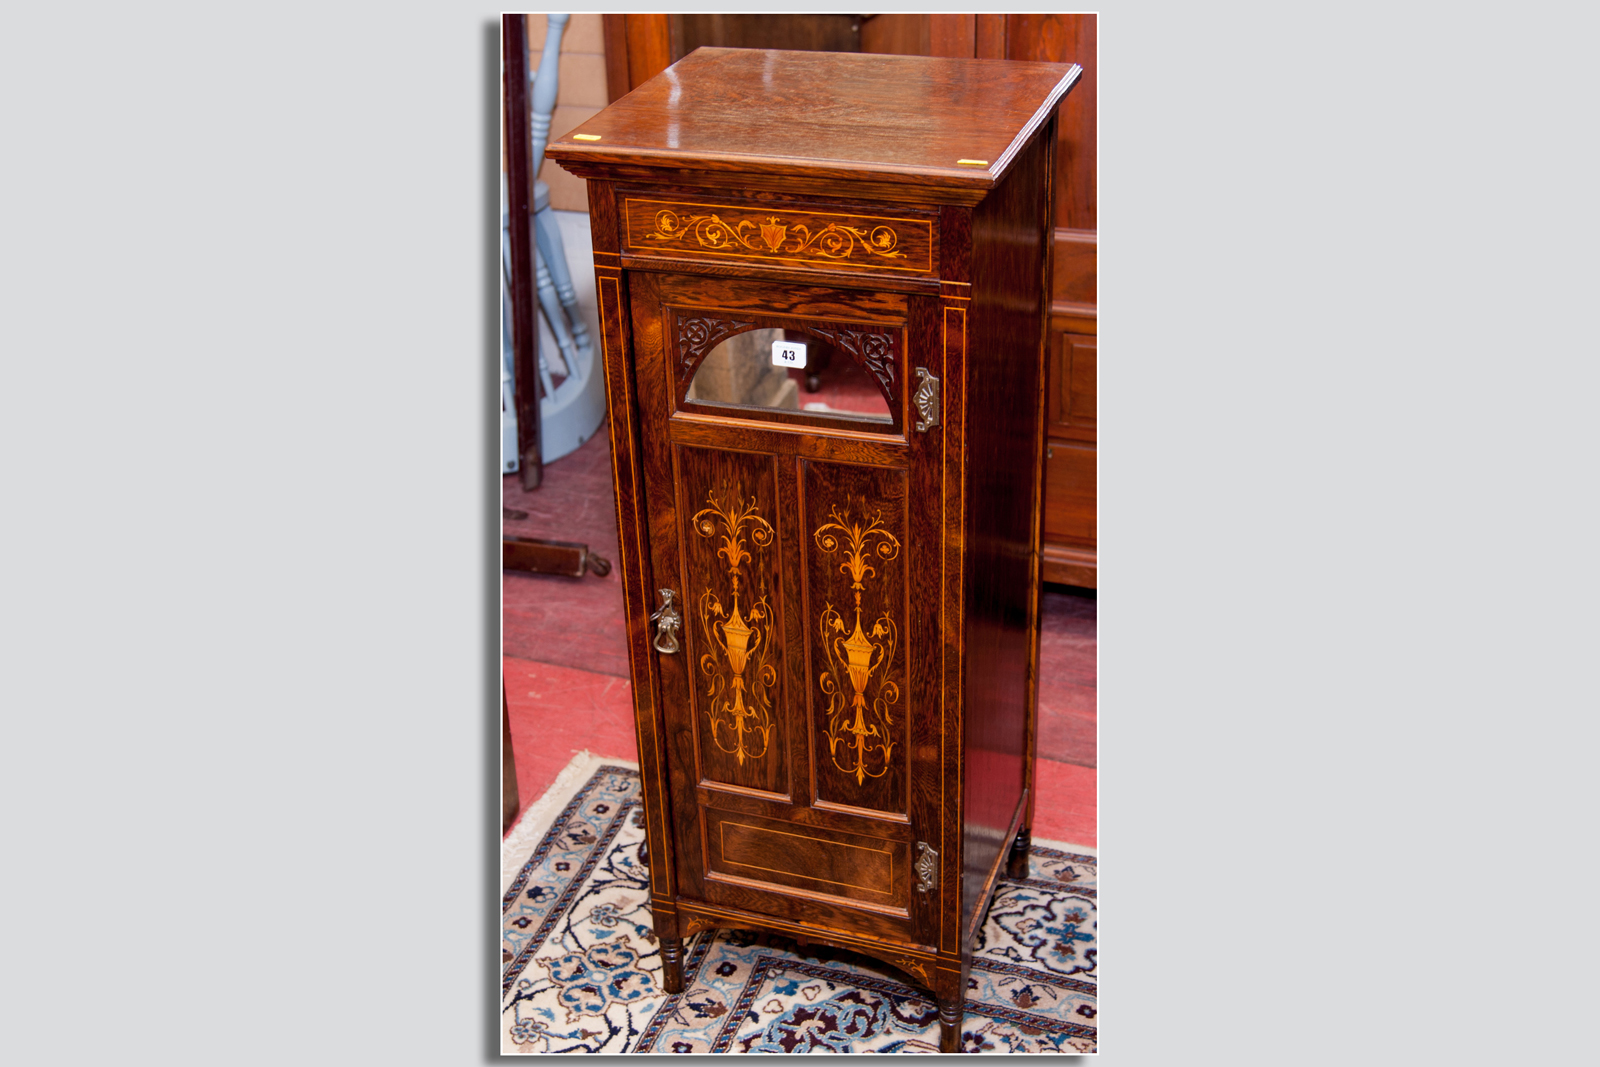 An Edwardian rosewood side cabinet - a single door cabinet decorated to the front with numerous